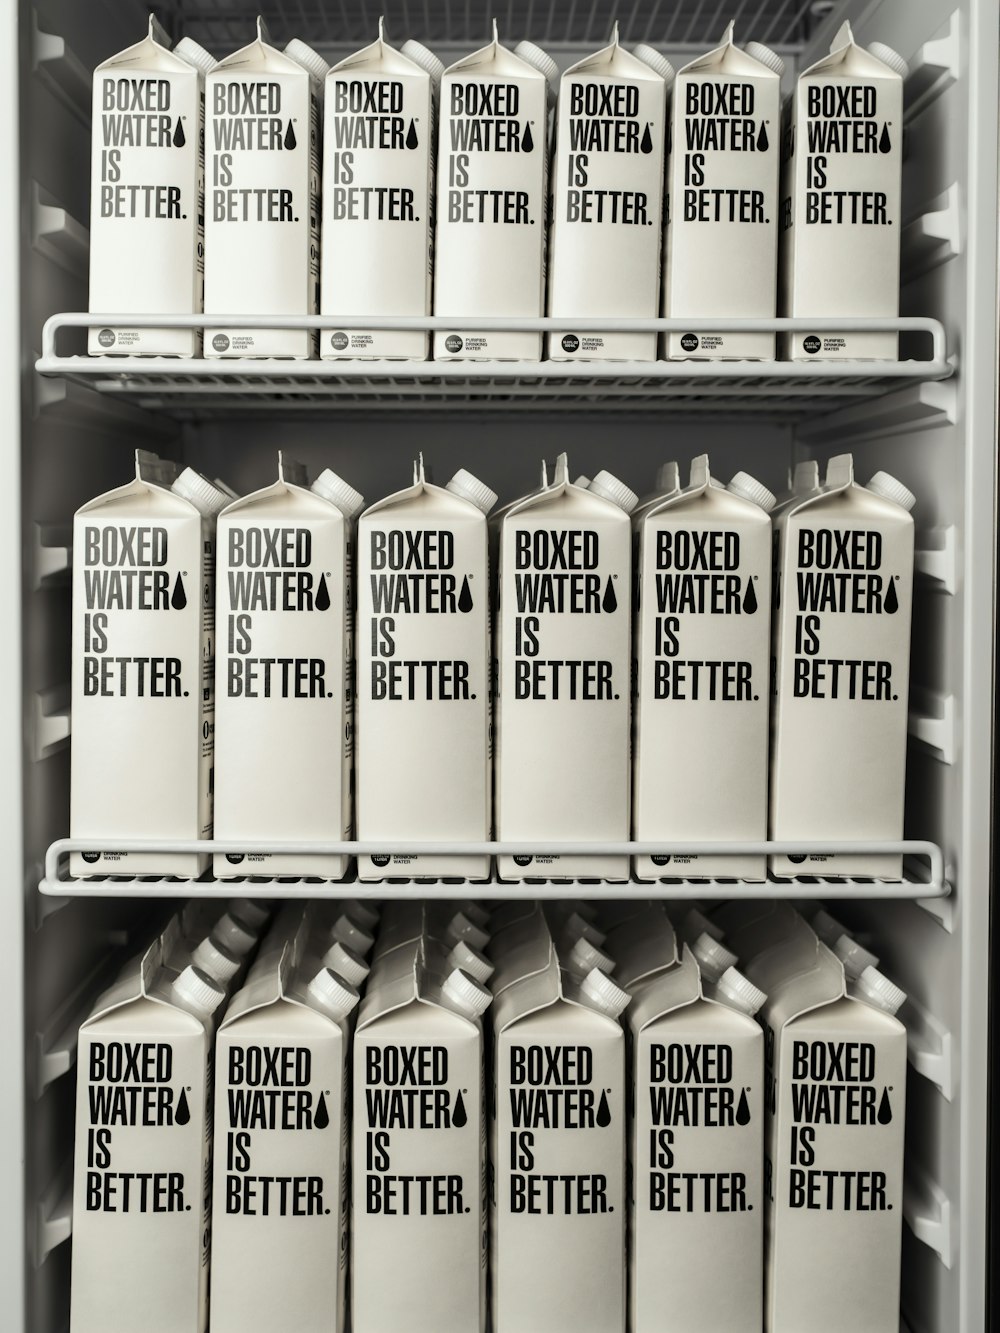 A water refrigerator full of Boxed Water cartons